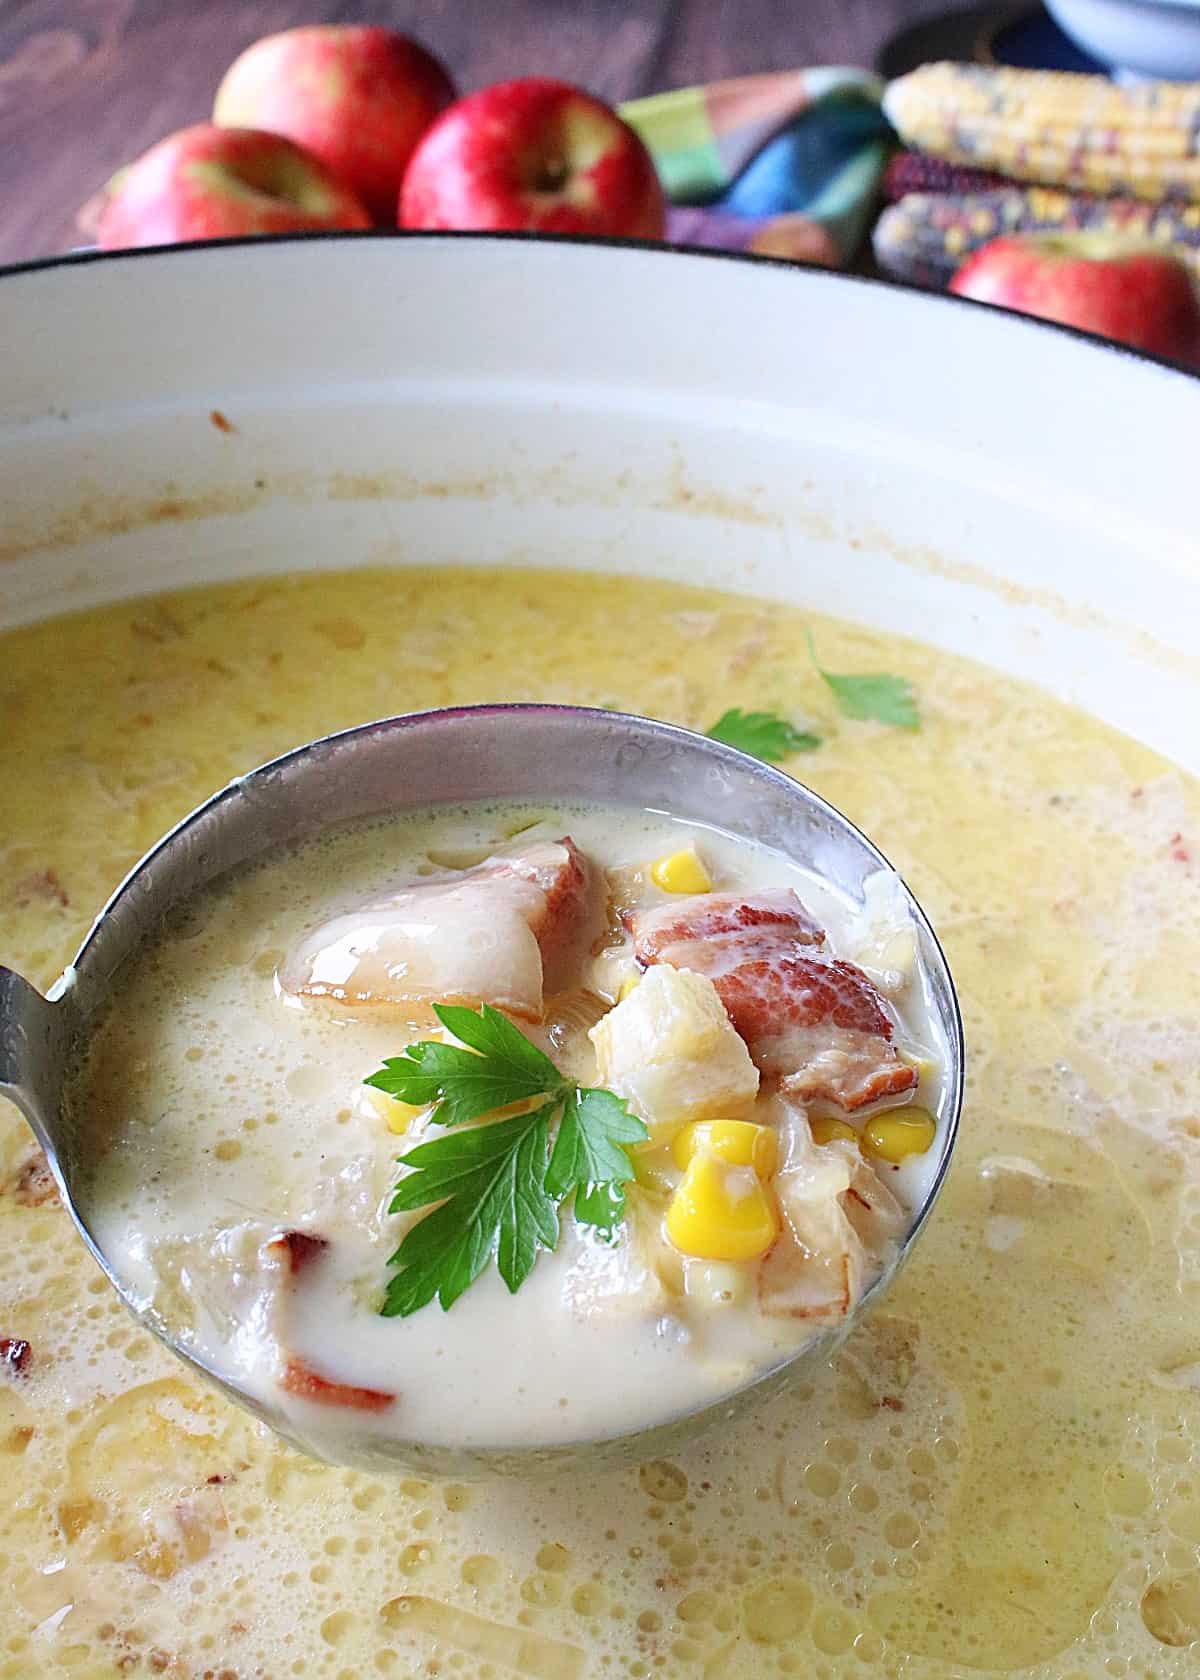 A ladle spooning up a serving of corn chowder with a parsley leave on top.